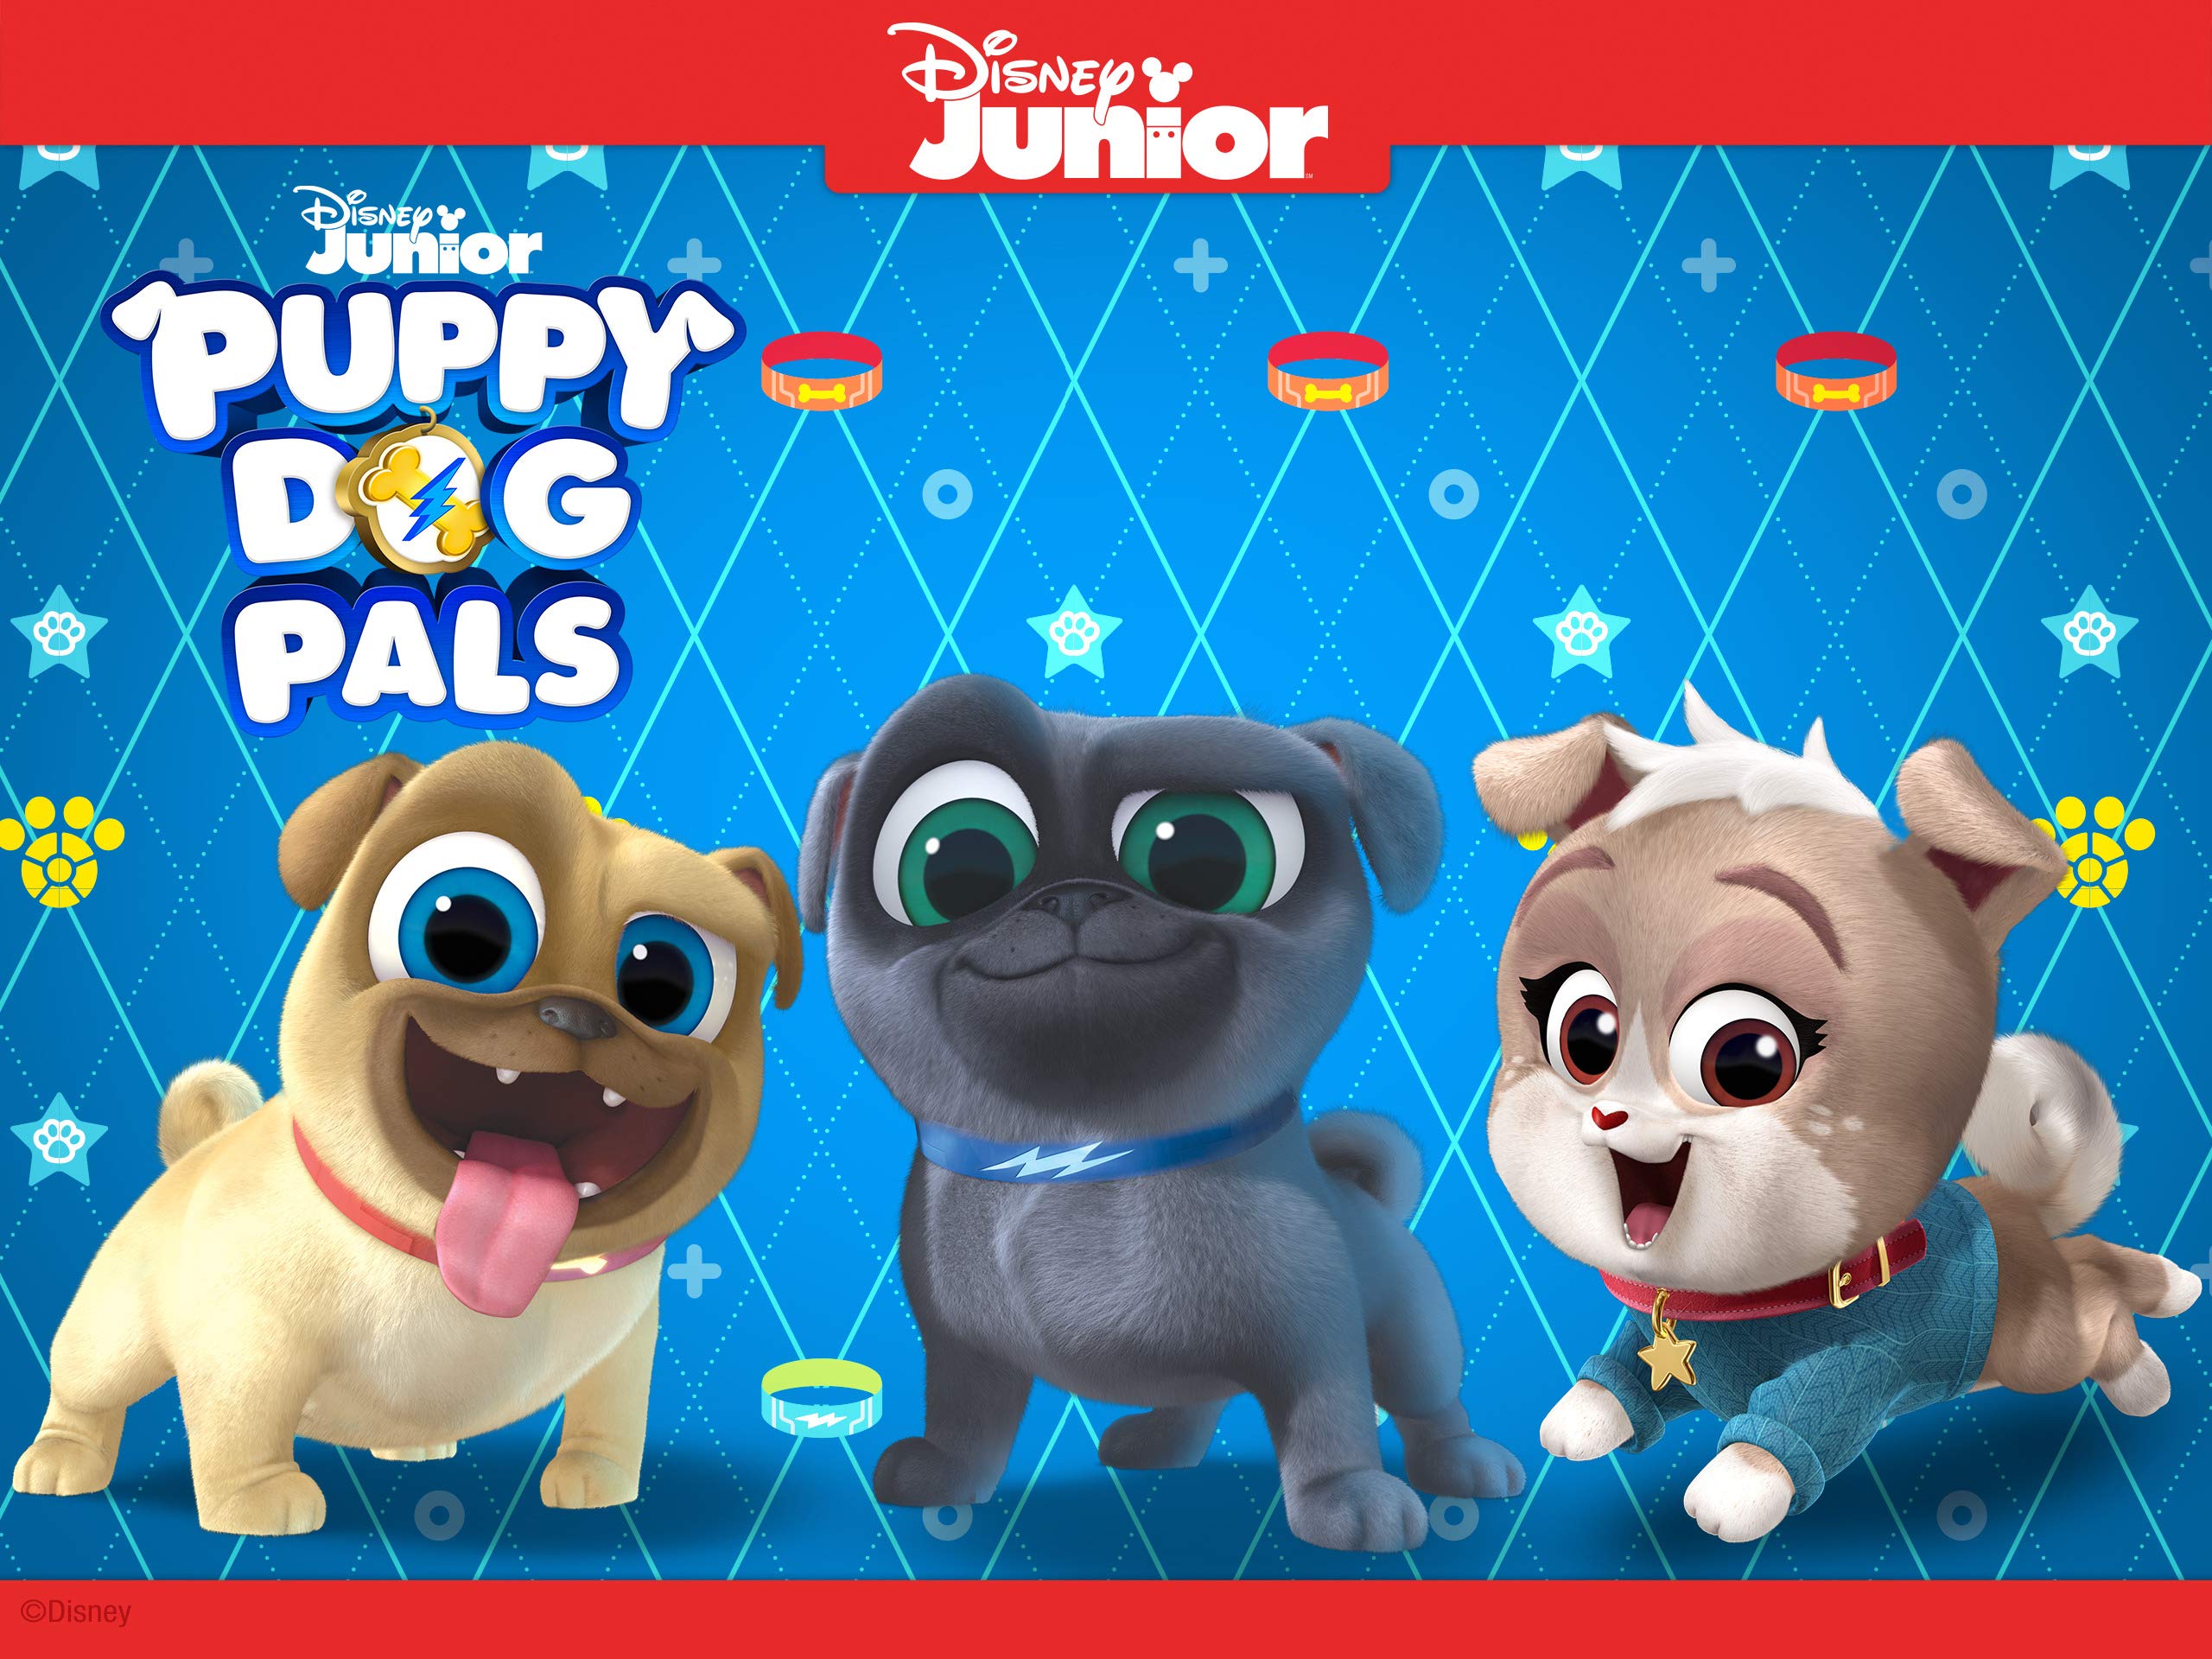 Puppy dog pals controversy